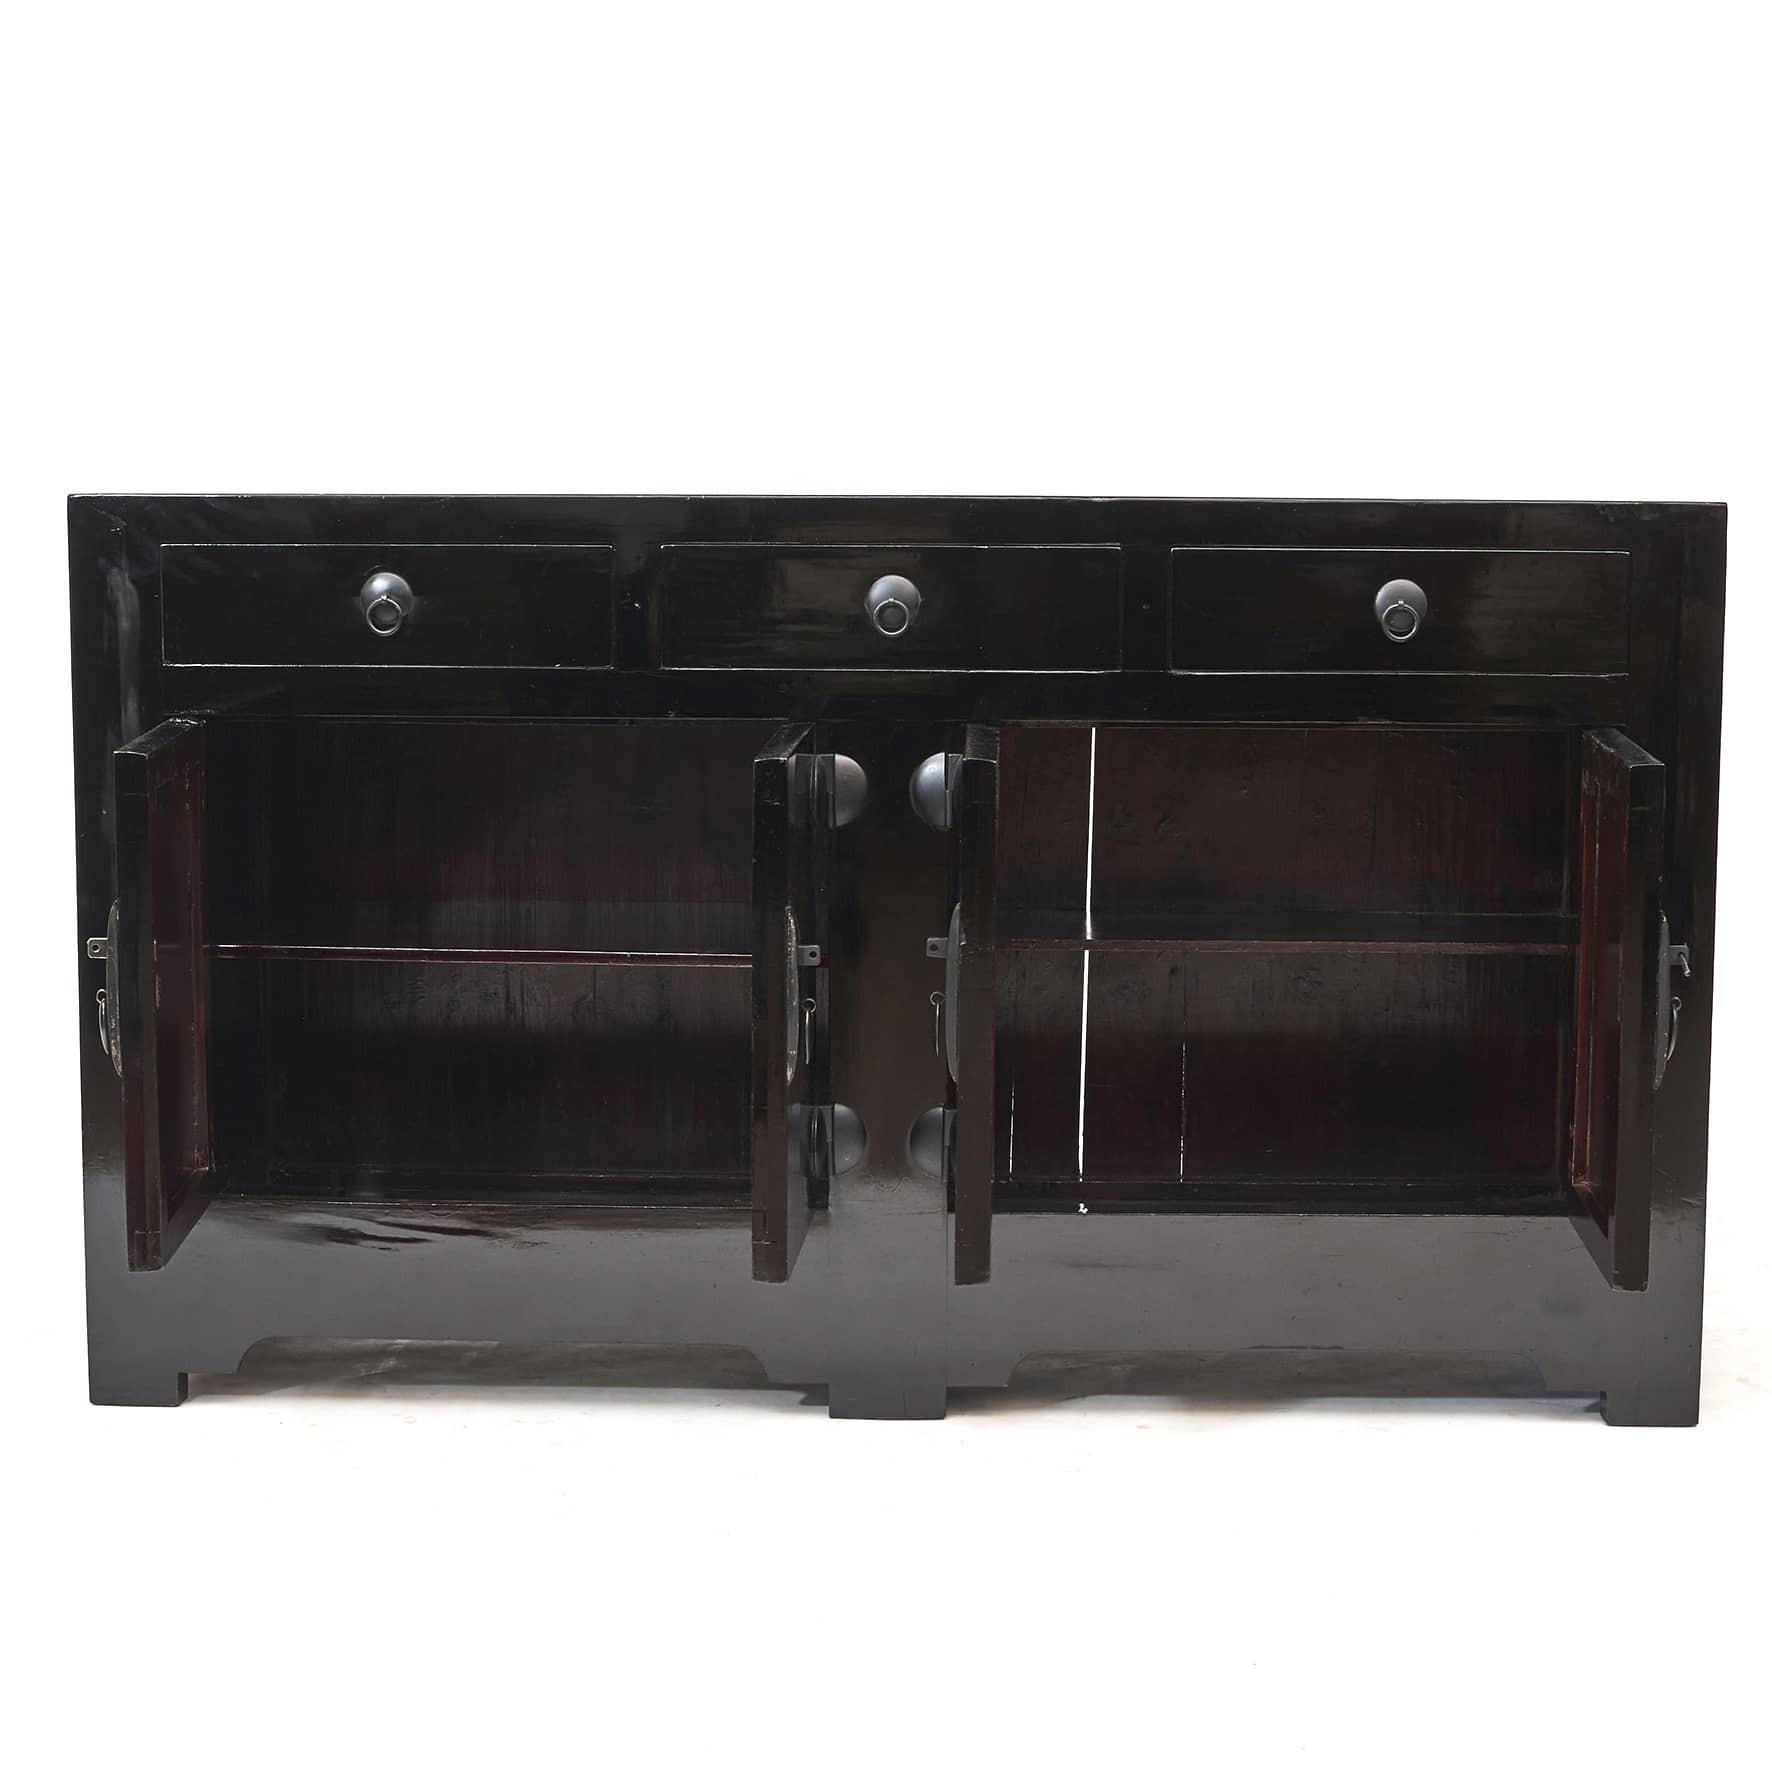 Qing Black Lacquer Sideboard Cabinet from Tianjin, 1860 - 1880 For Sale